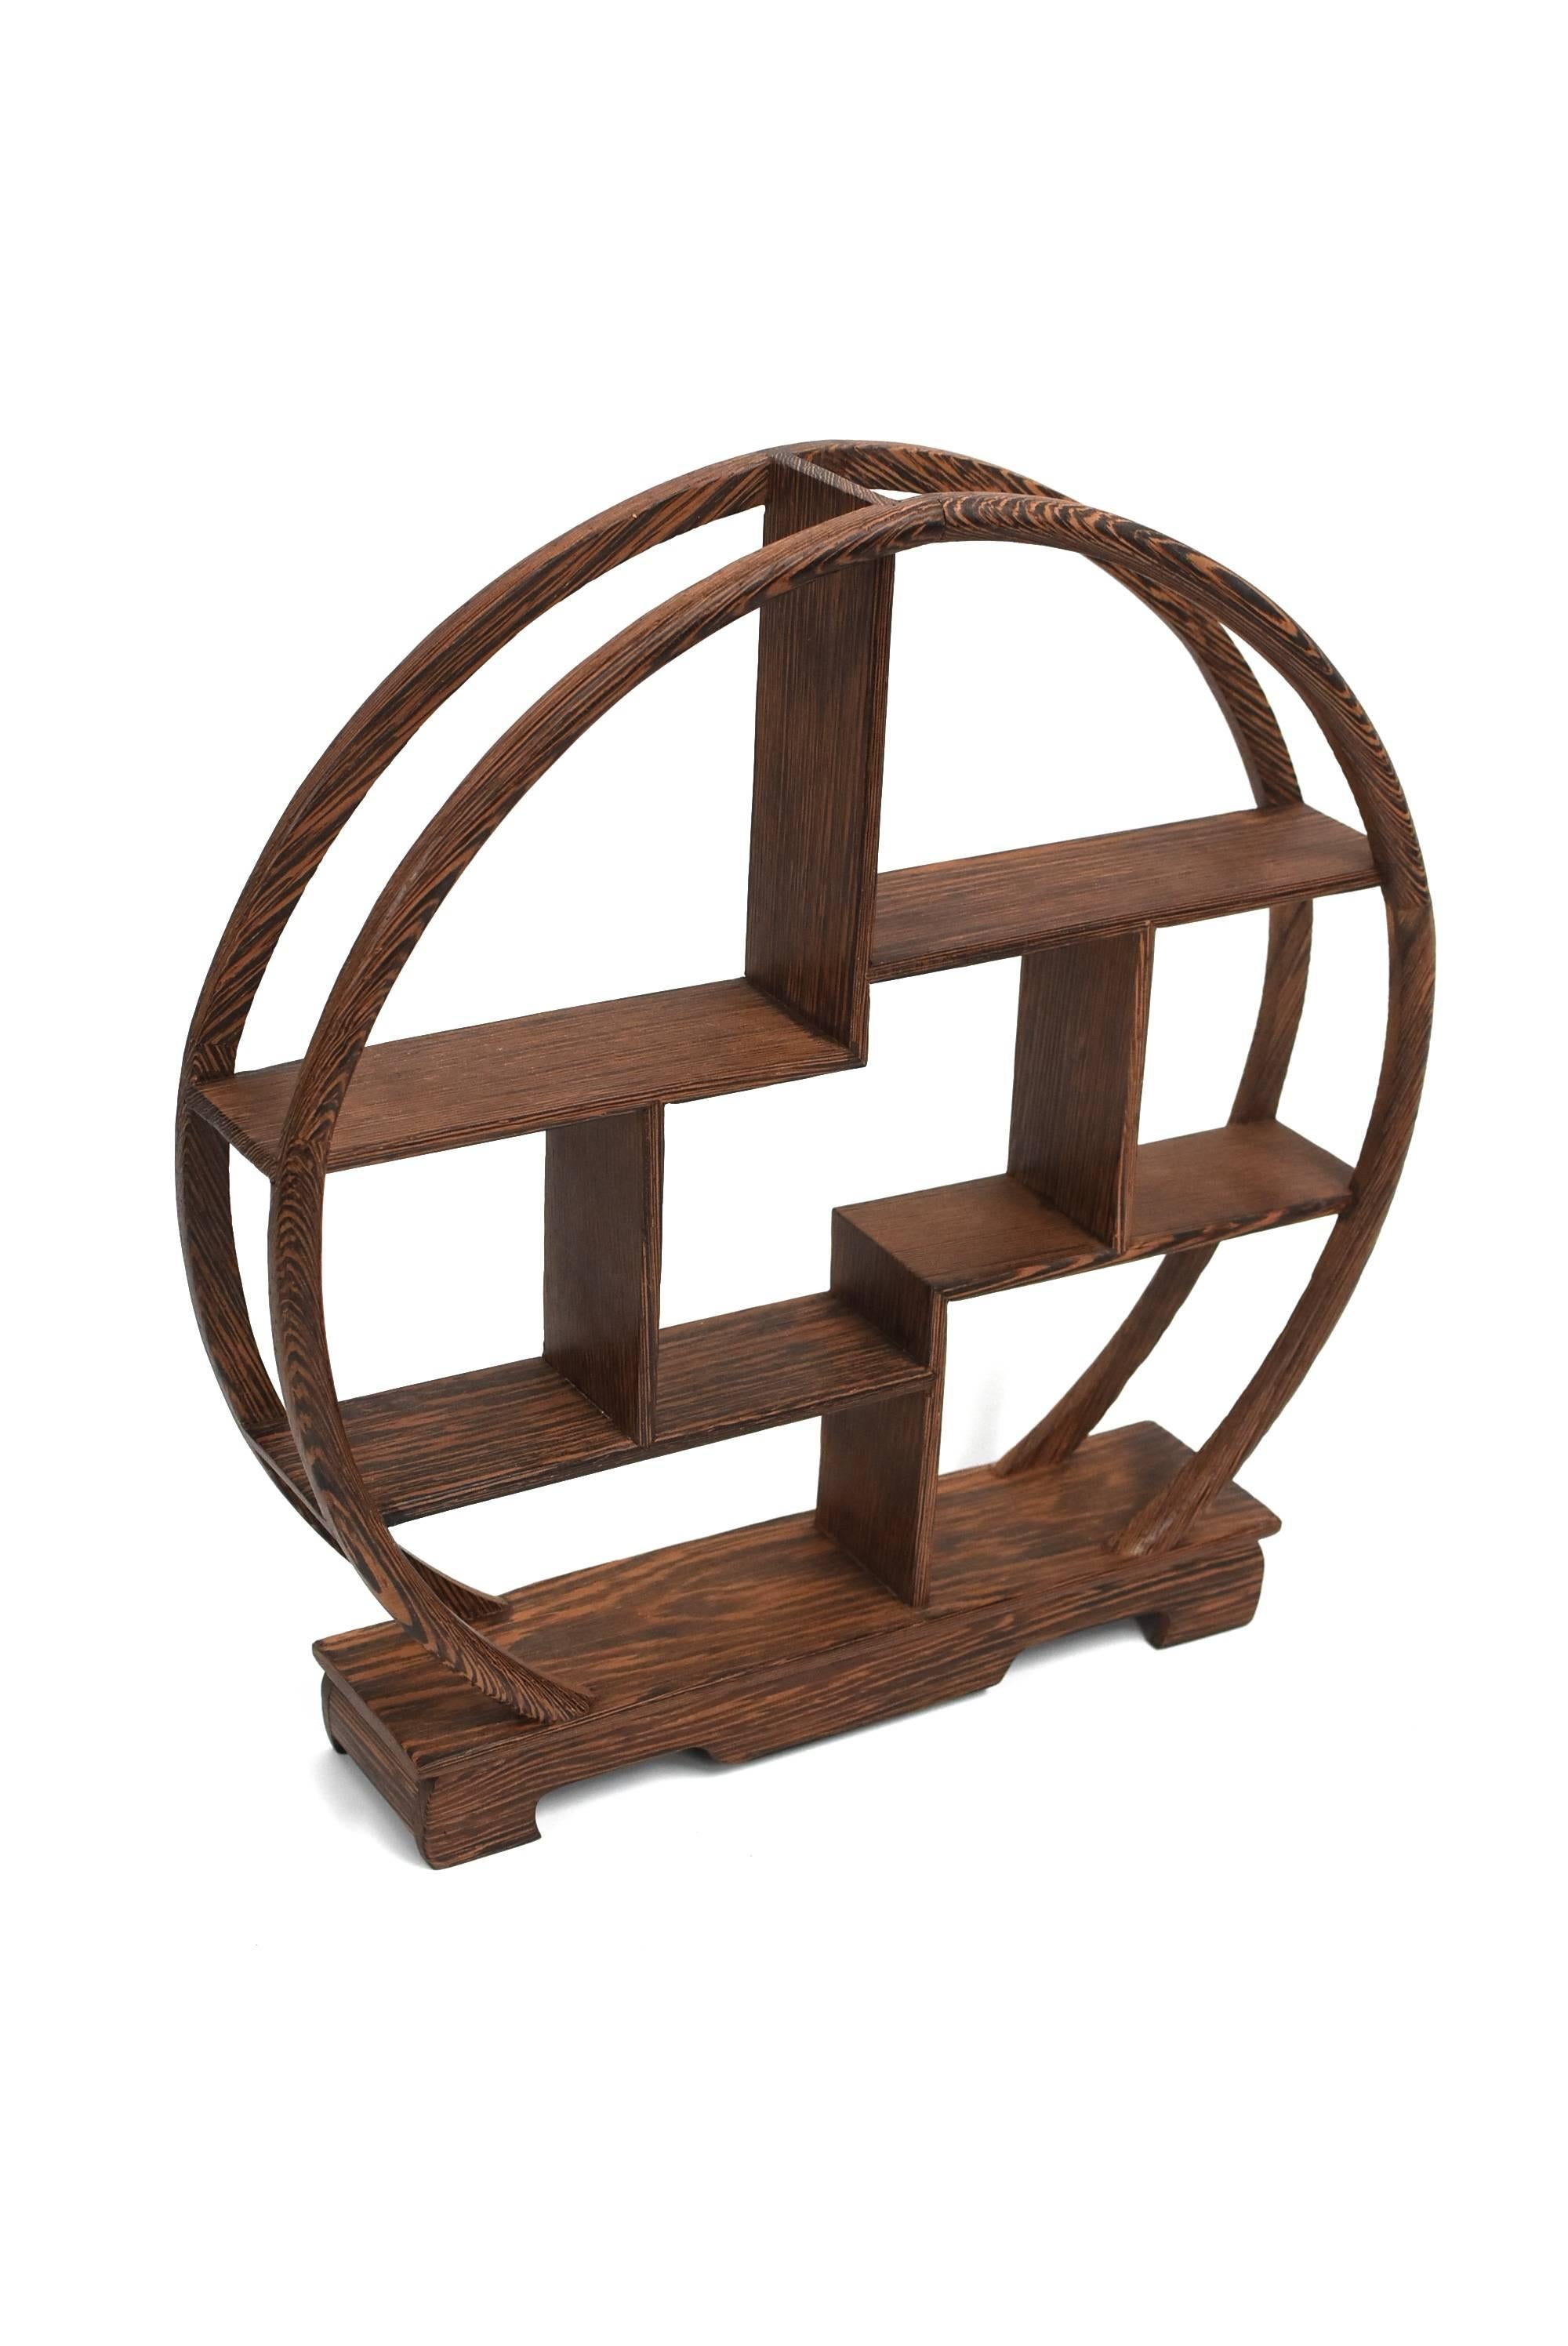 A pair of fine ji-chi-mu solid wood stands for display of your miniature collections. Perfect moon shape circle is dramatic and elegant. There are eight spaces of various heights and sizes to suit your little treasures. The wood is absolutely